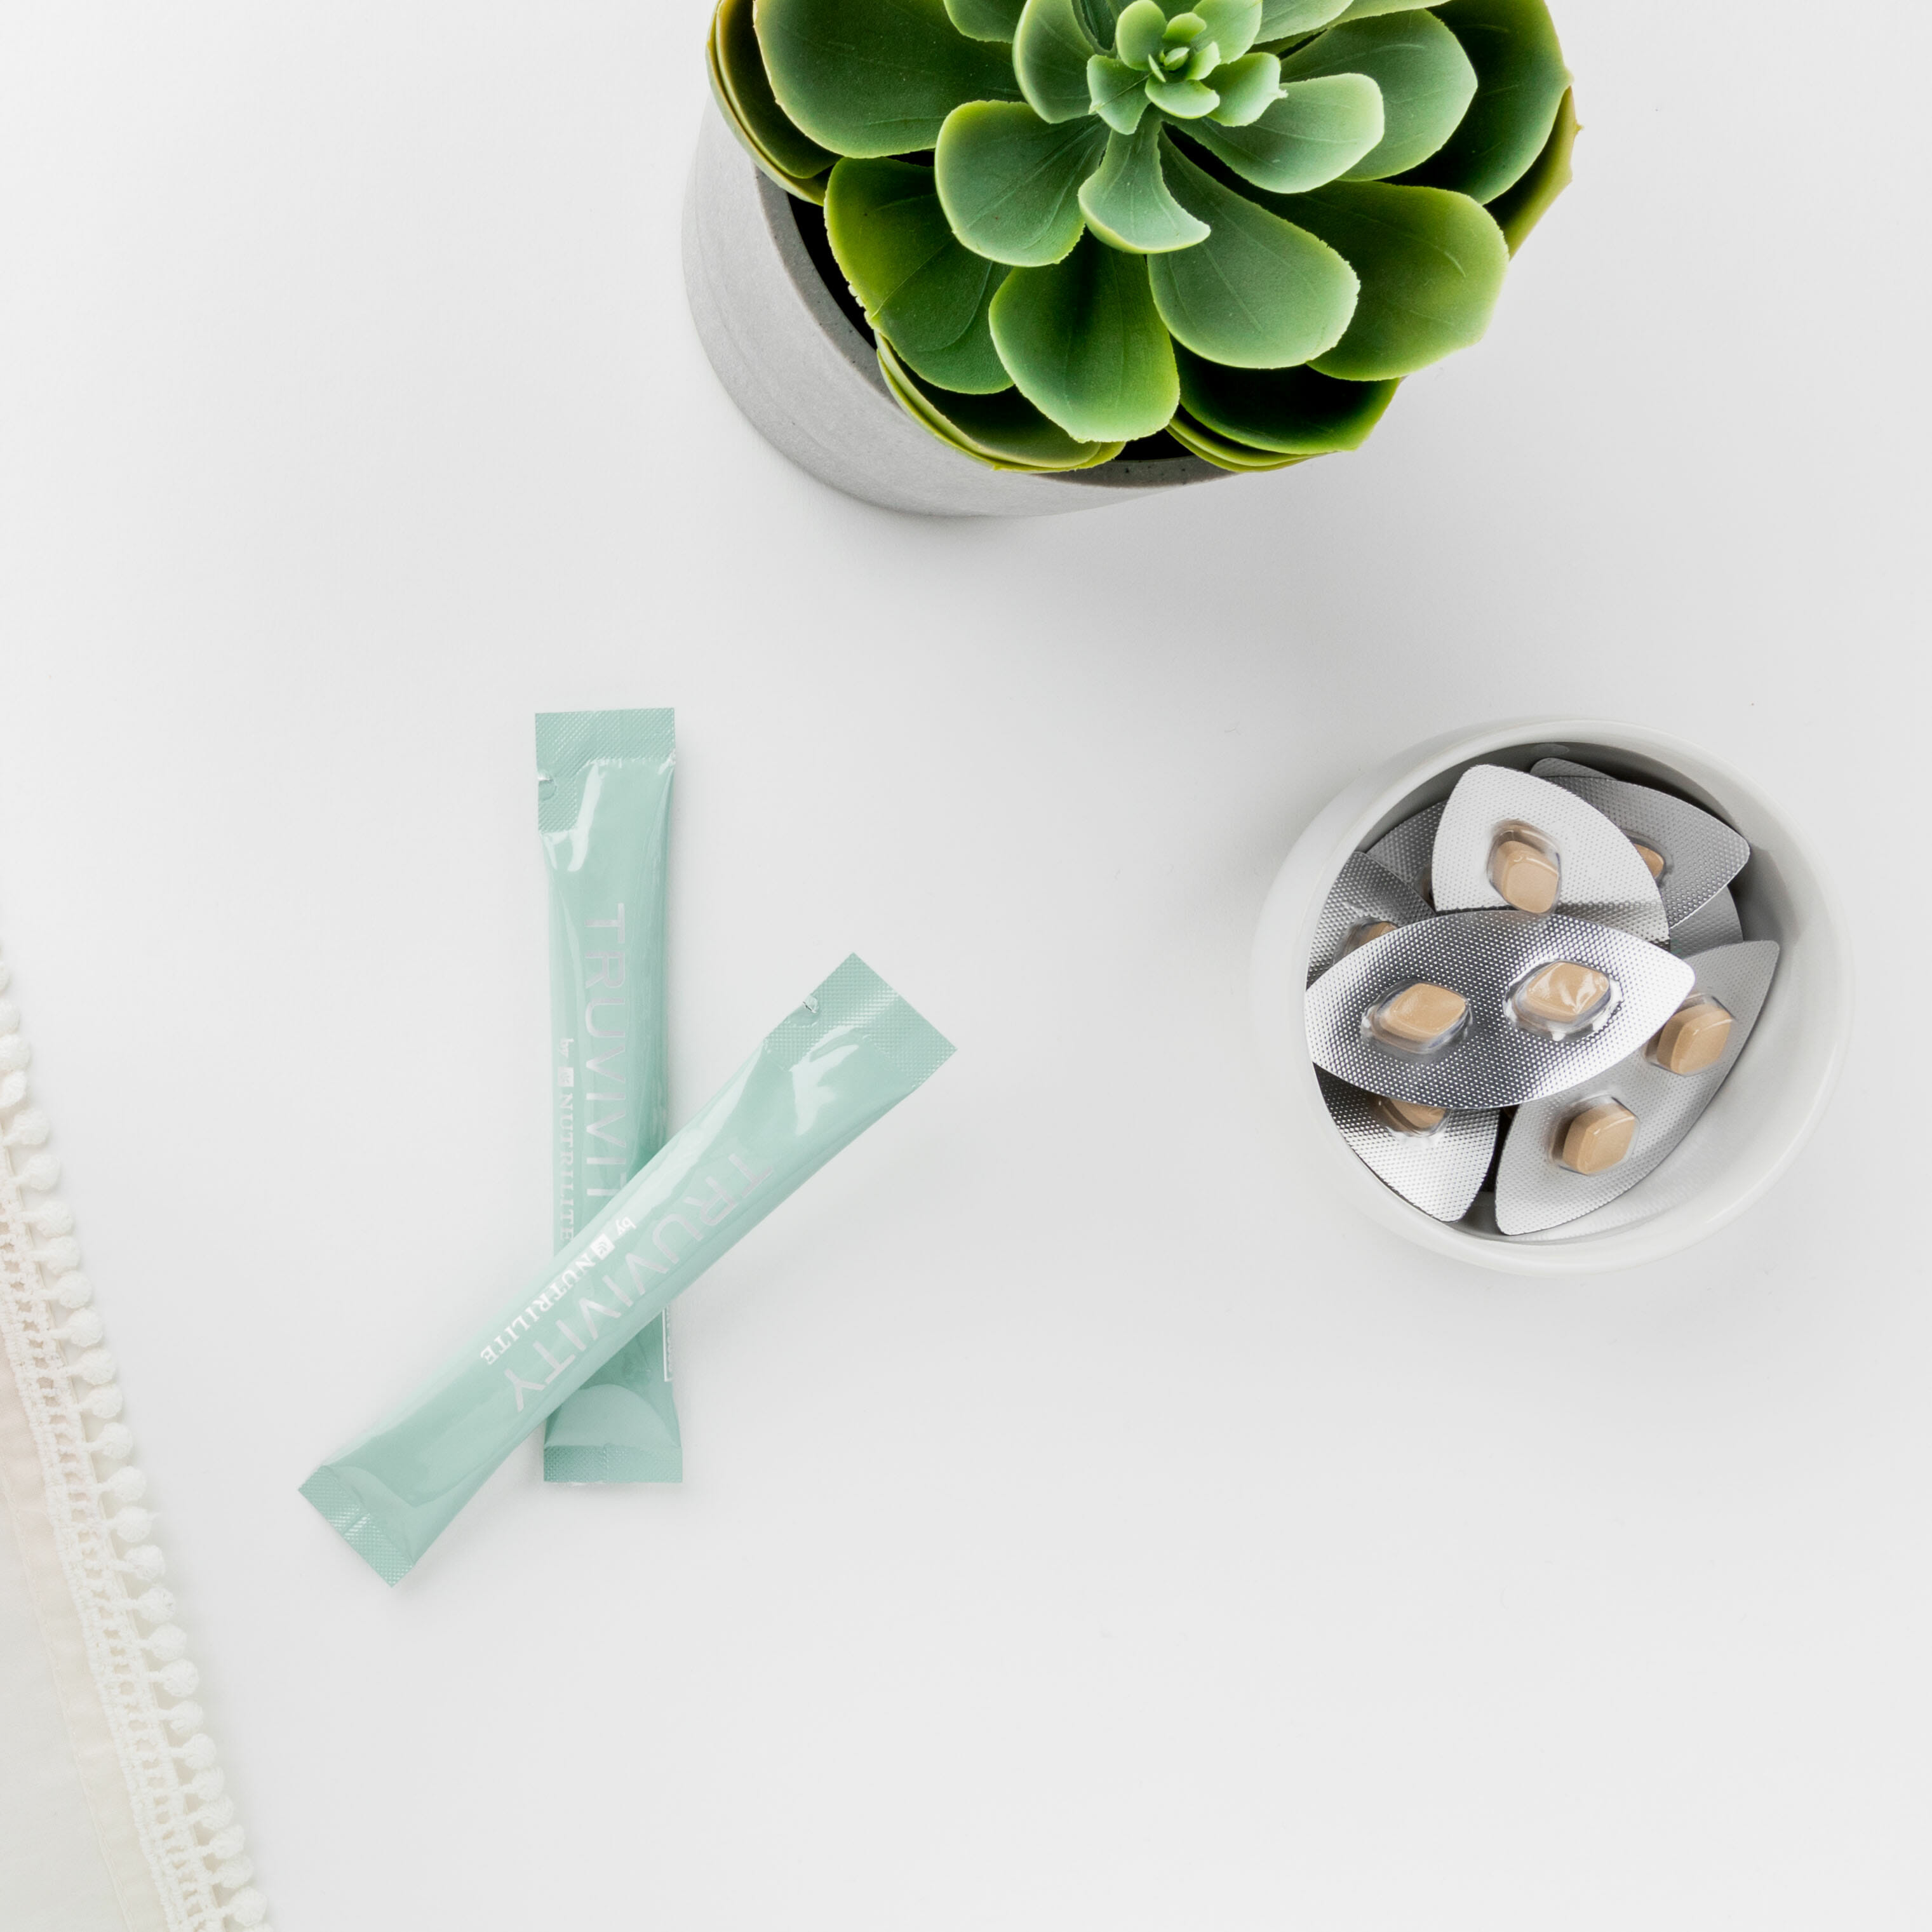 A tabletop with a succulent next to Truvivity powder drink stick packs and supplements. Truvivity is a simple yet powerful way to balance the sugars in your body and prevent the breakdown of skin cells leading to skin damage.